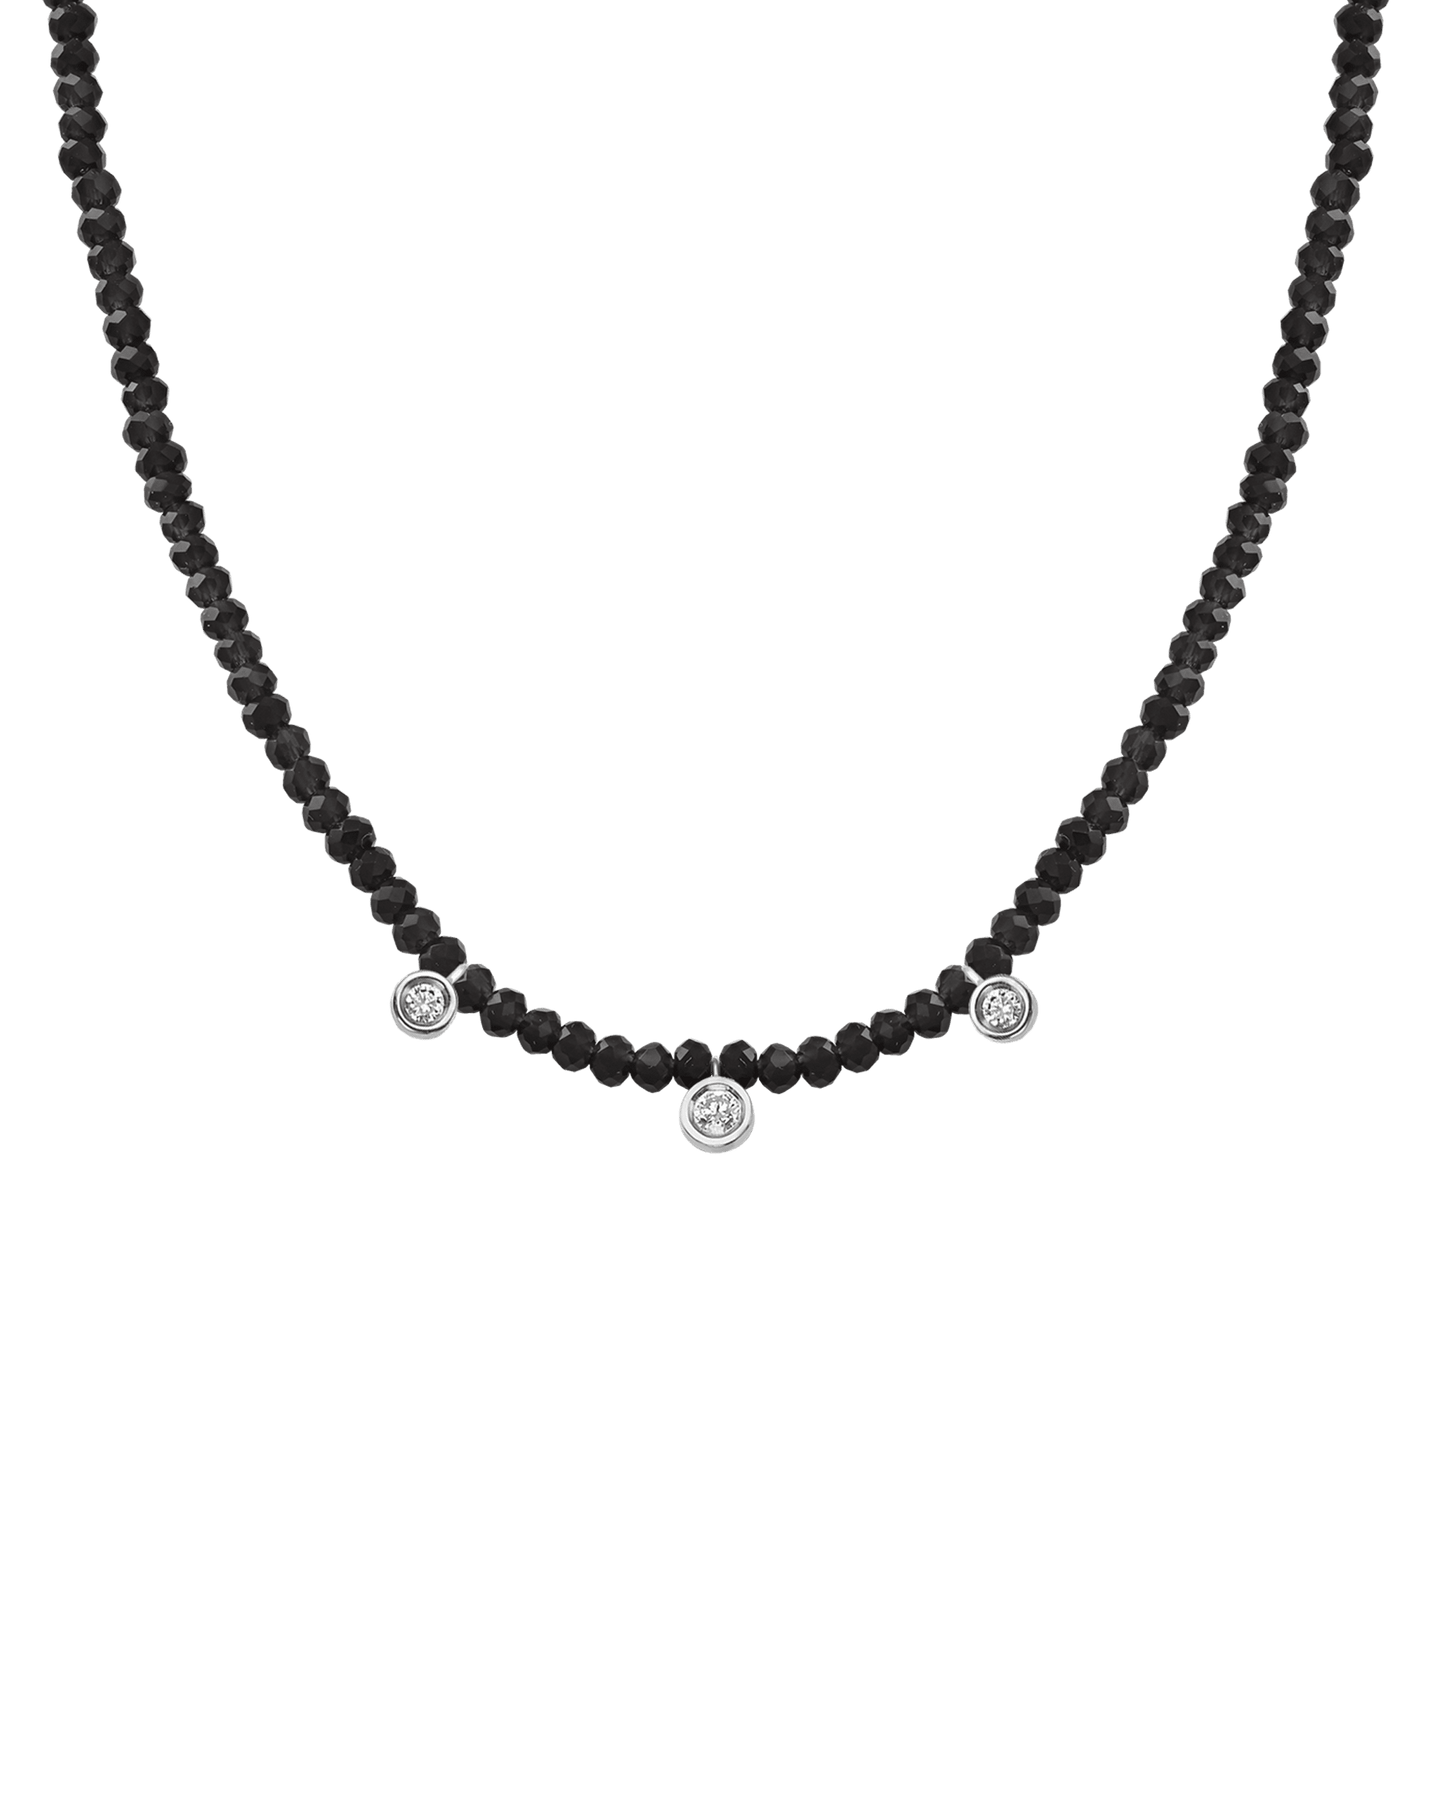 Black Spinel Gemstone & Three diamonds Necklace - 14K White Gold Necklaces magal-dev Glass Beads Black Spinnel 14" - Collar 